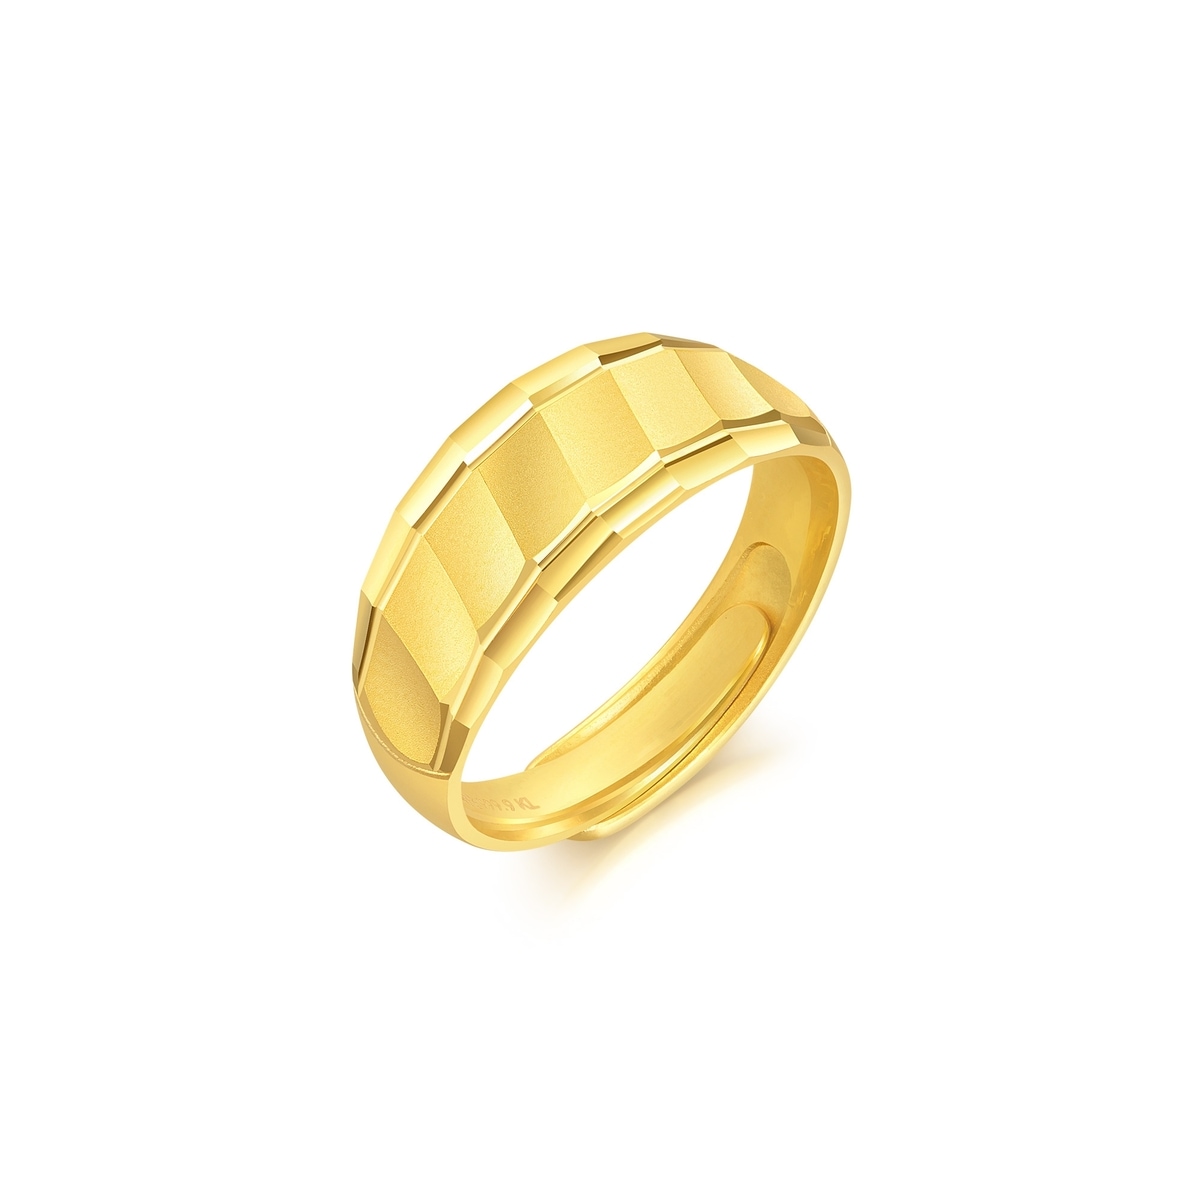 999.9 Gold Ring - 82817R | Chow Sang Sang Jewellery